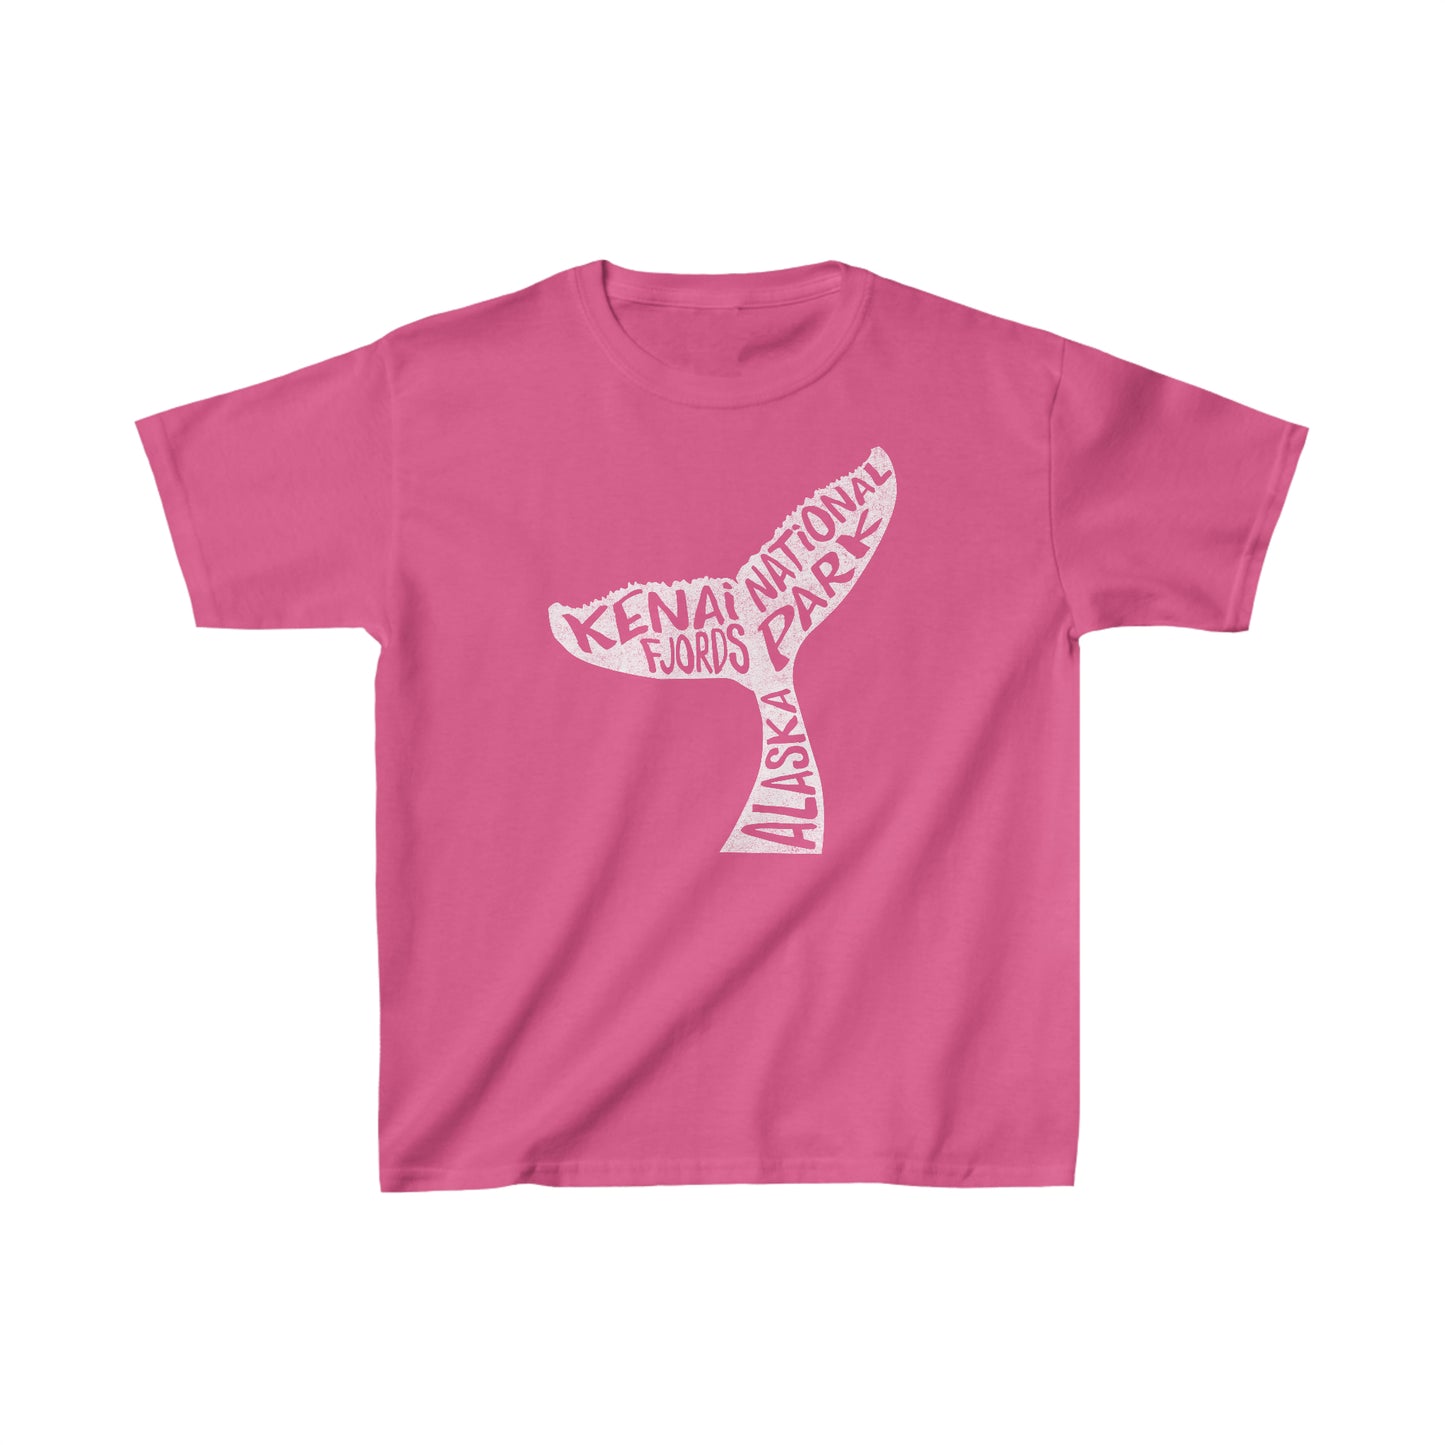 Kenia Fjords National Park Child T-Shirt - Whale Tail Chunky Text